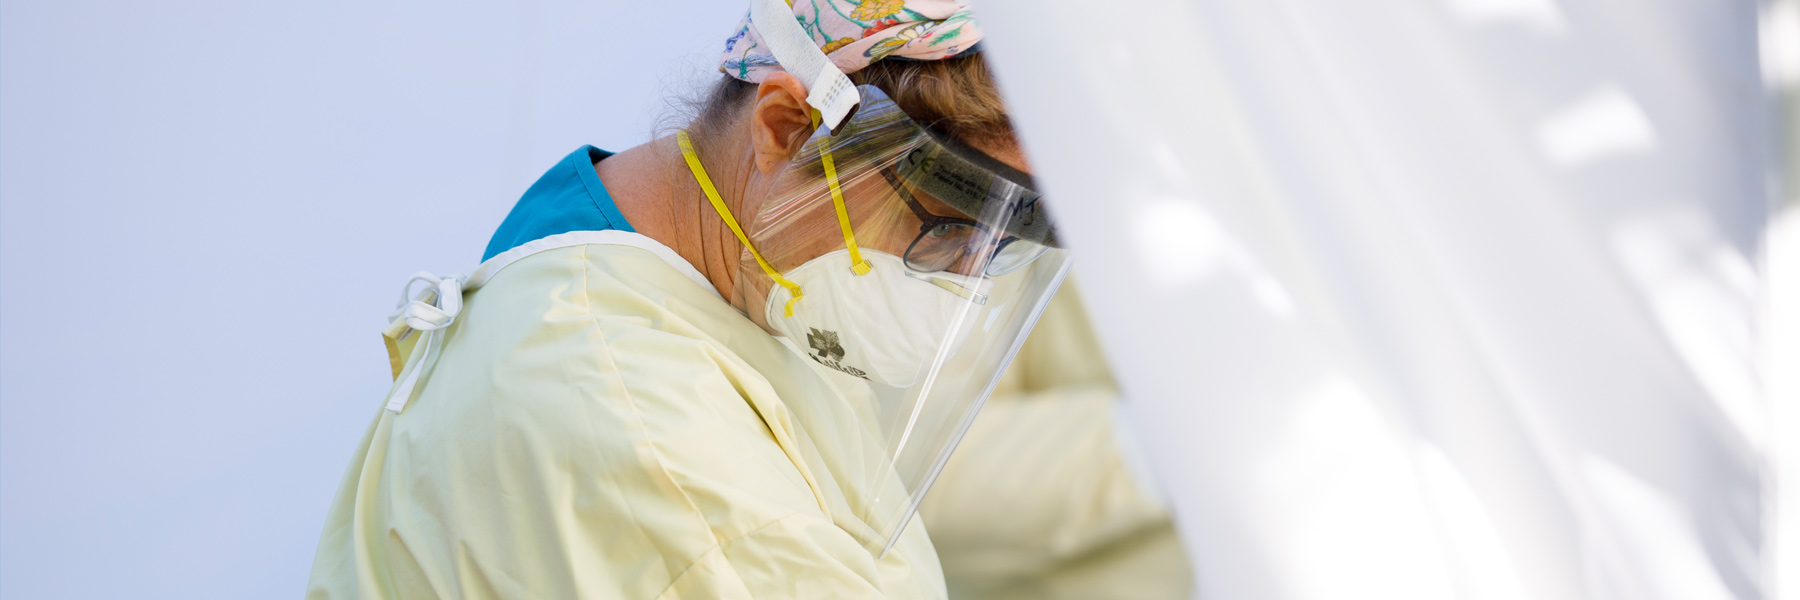 A bright, airy photo of a nurse wearing PPE working in a tent. Her soft yellow scrubs and the white tent background draw the point of focus to her worried expression.